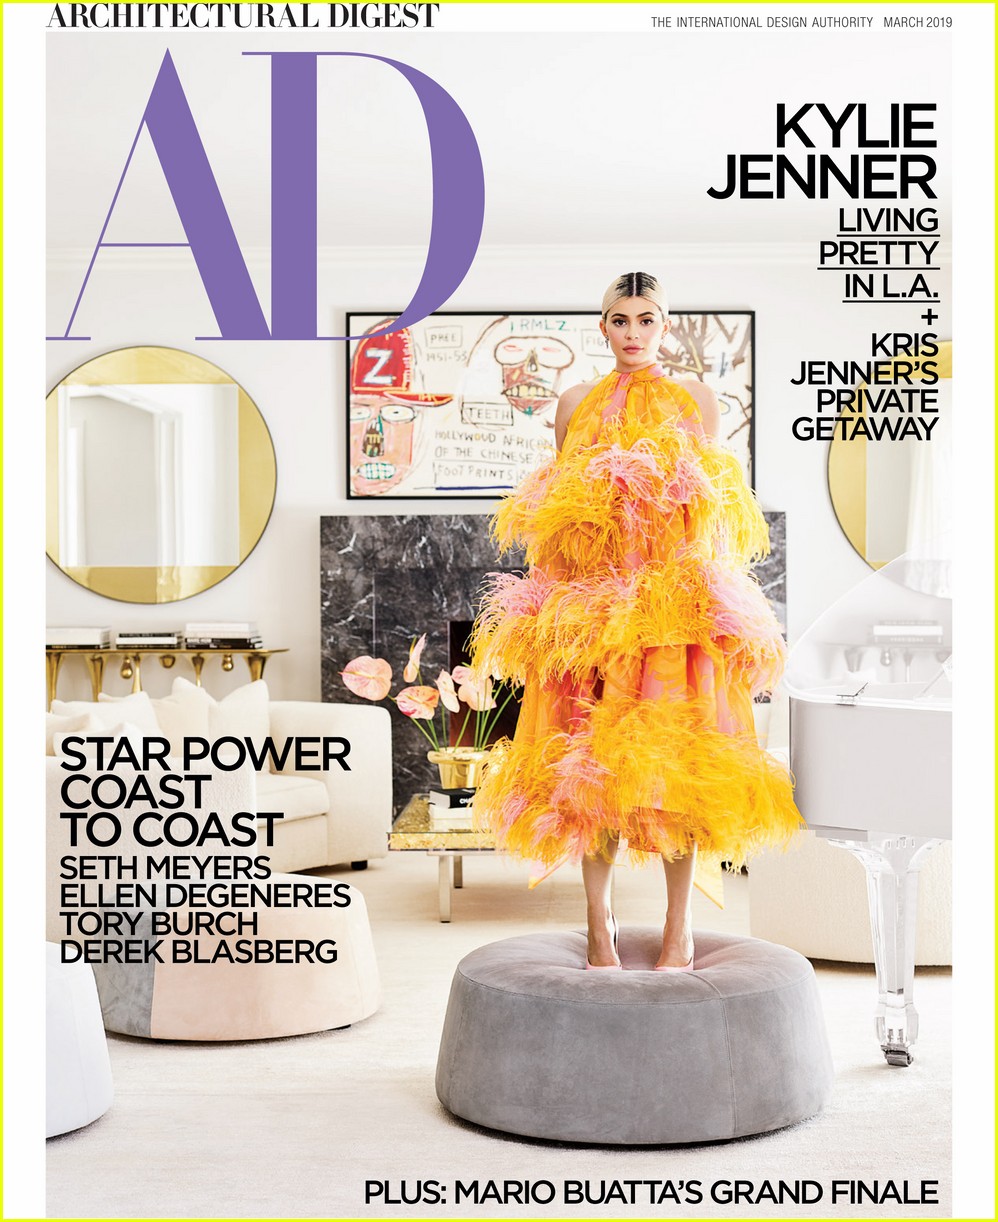 kylie jenner architectural digest februrary 2019 02